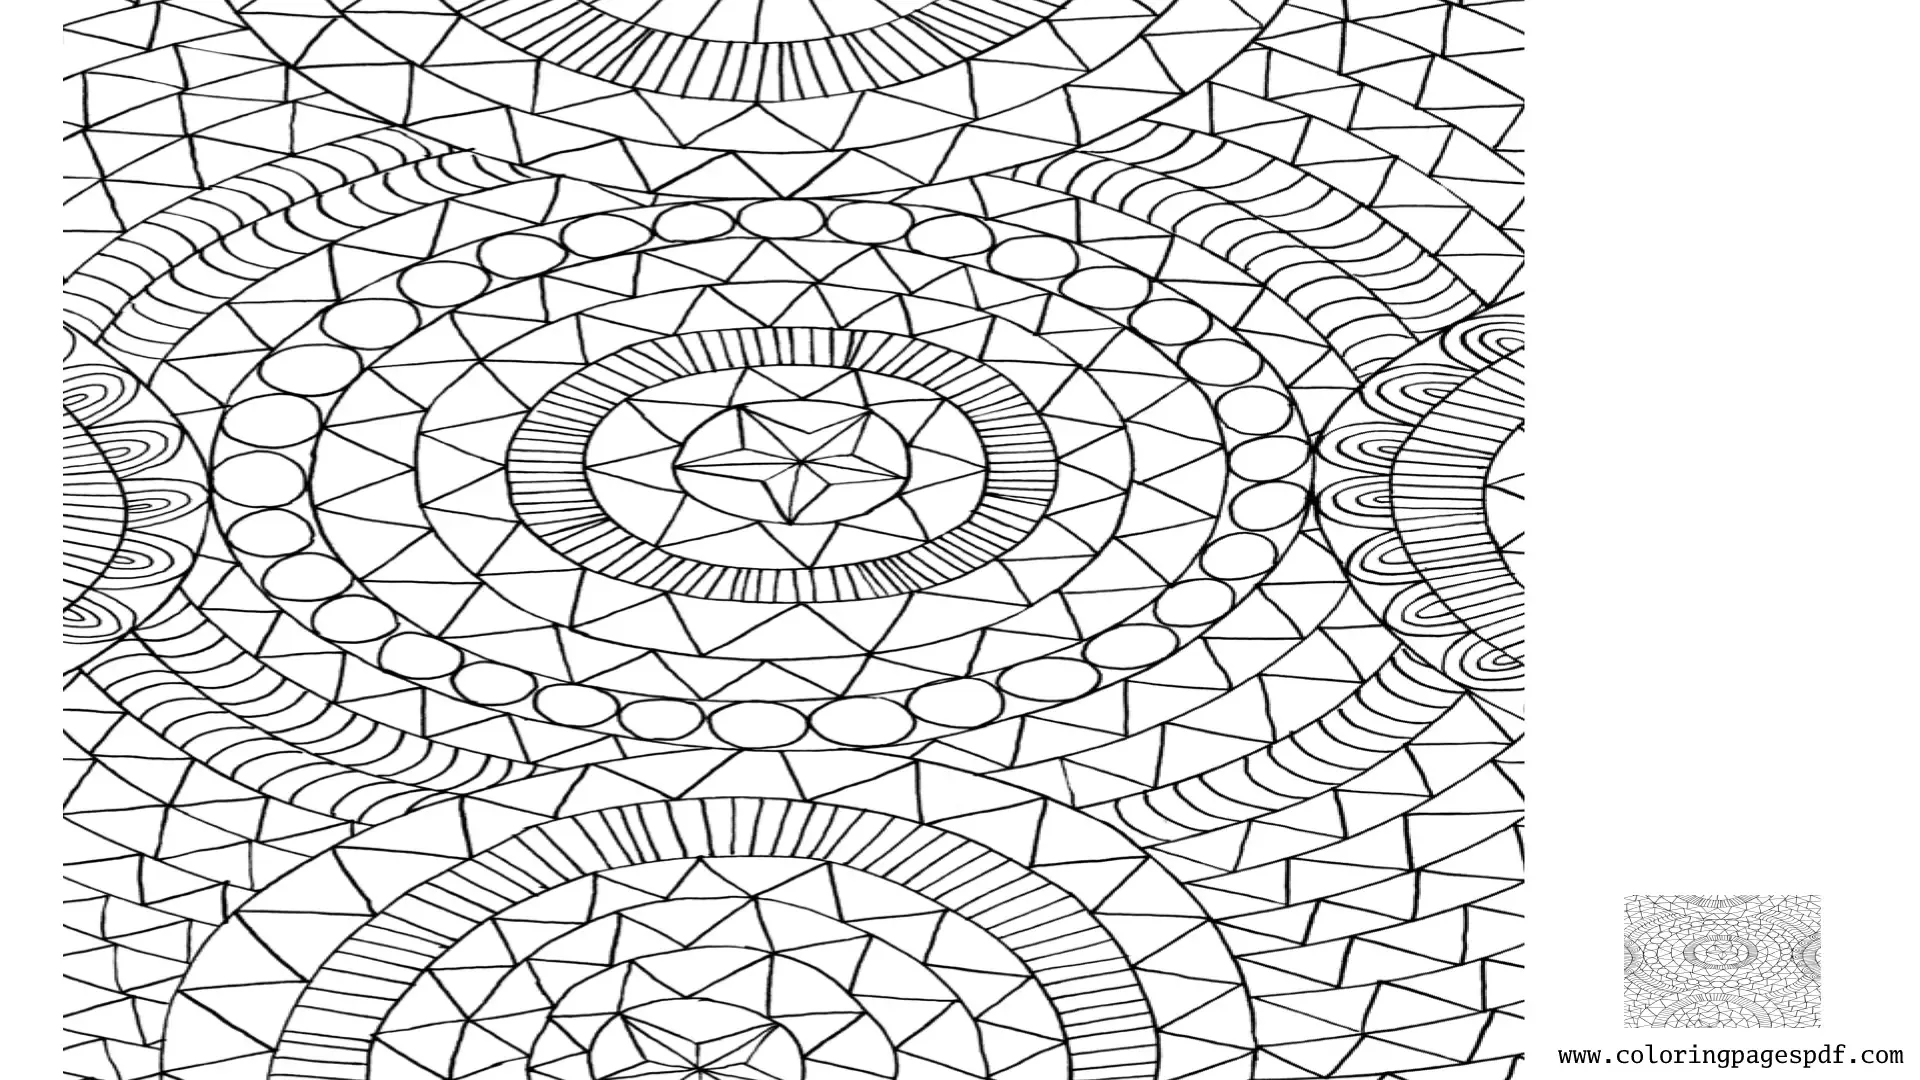 Coloring Pages Of All Shapes Mandala